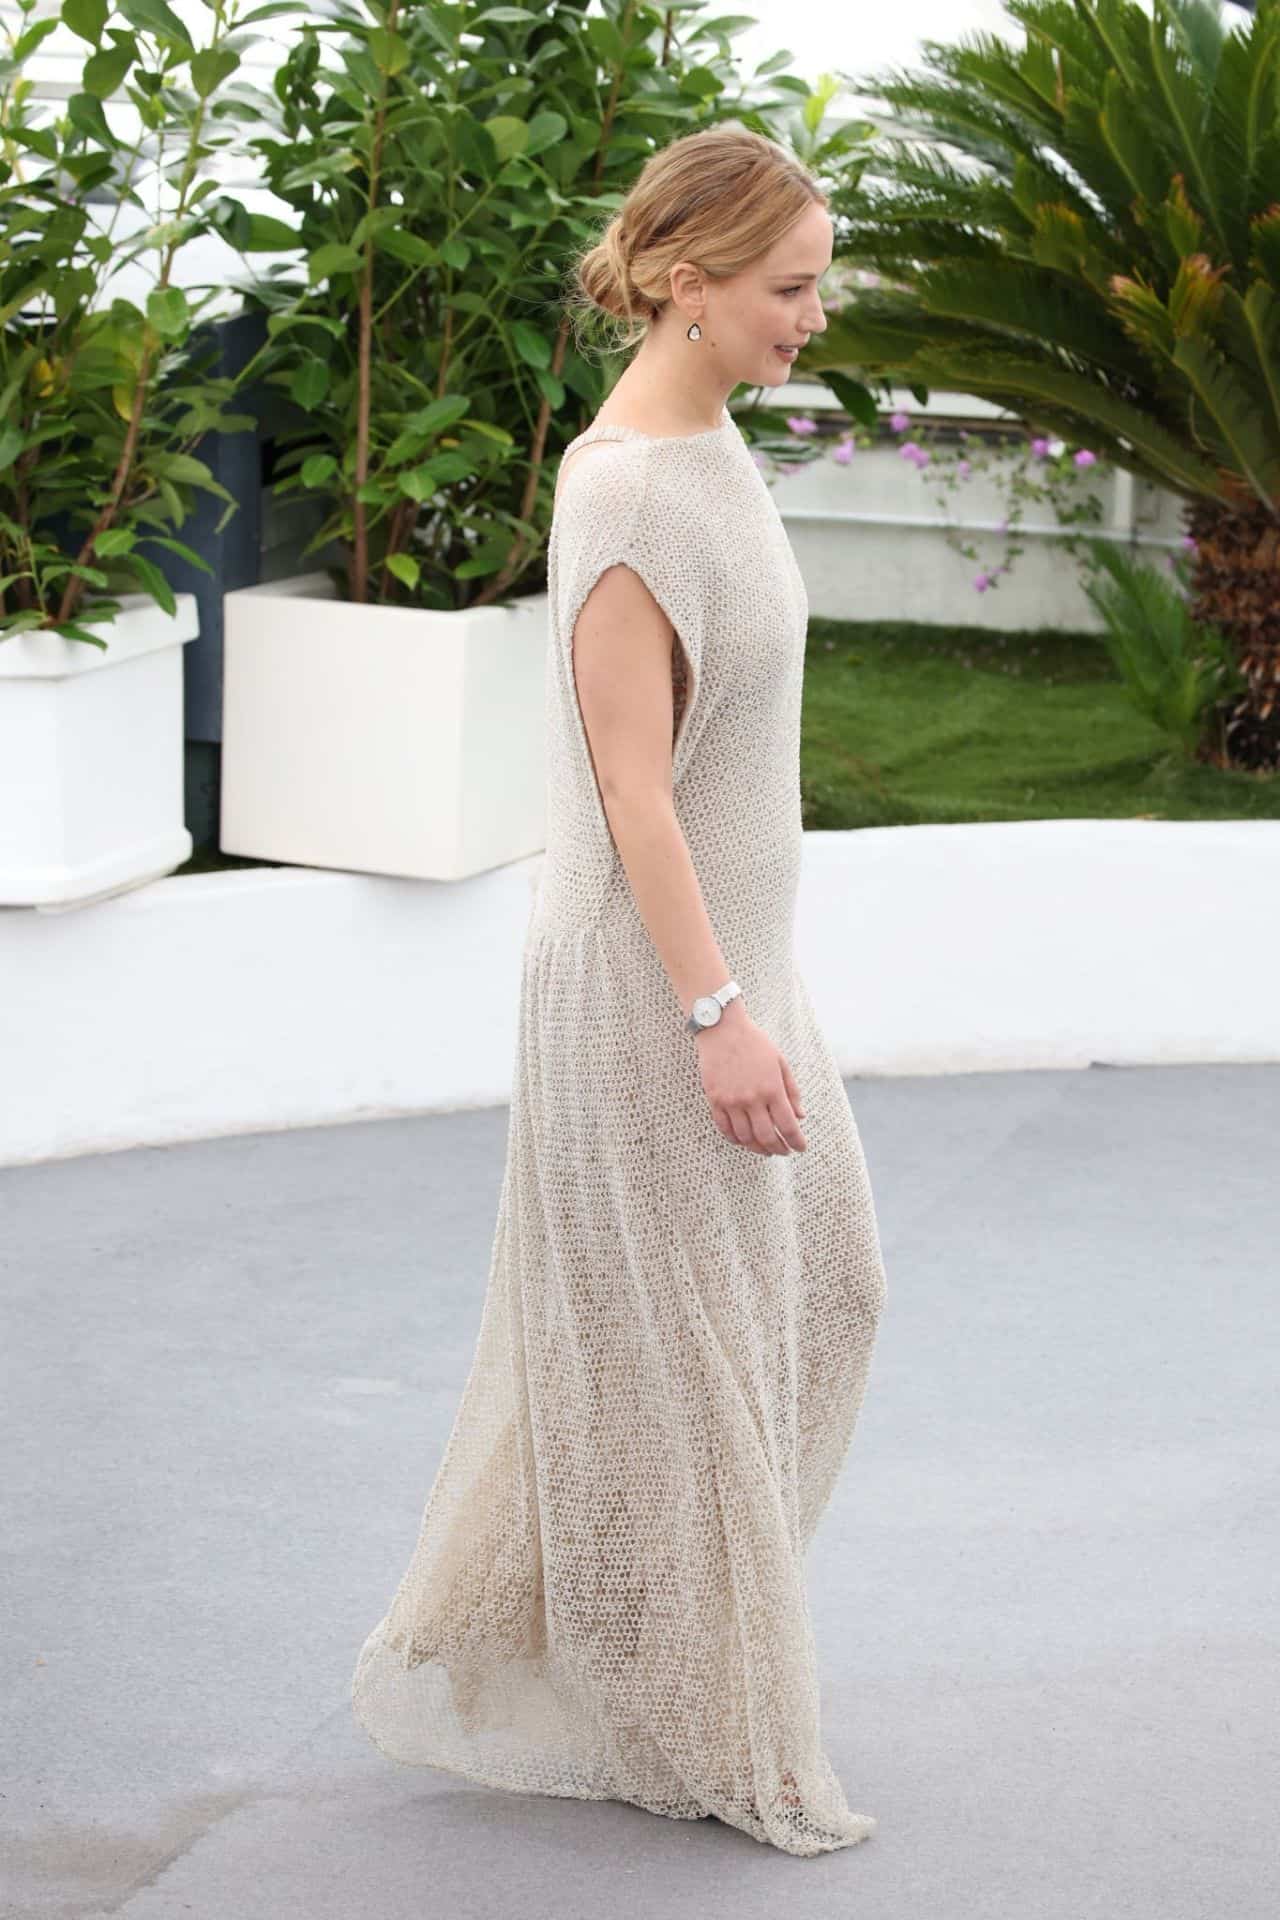 Jennifer Lawrence Brings the Heat in Crochet Dior Dress at Cannes